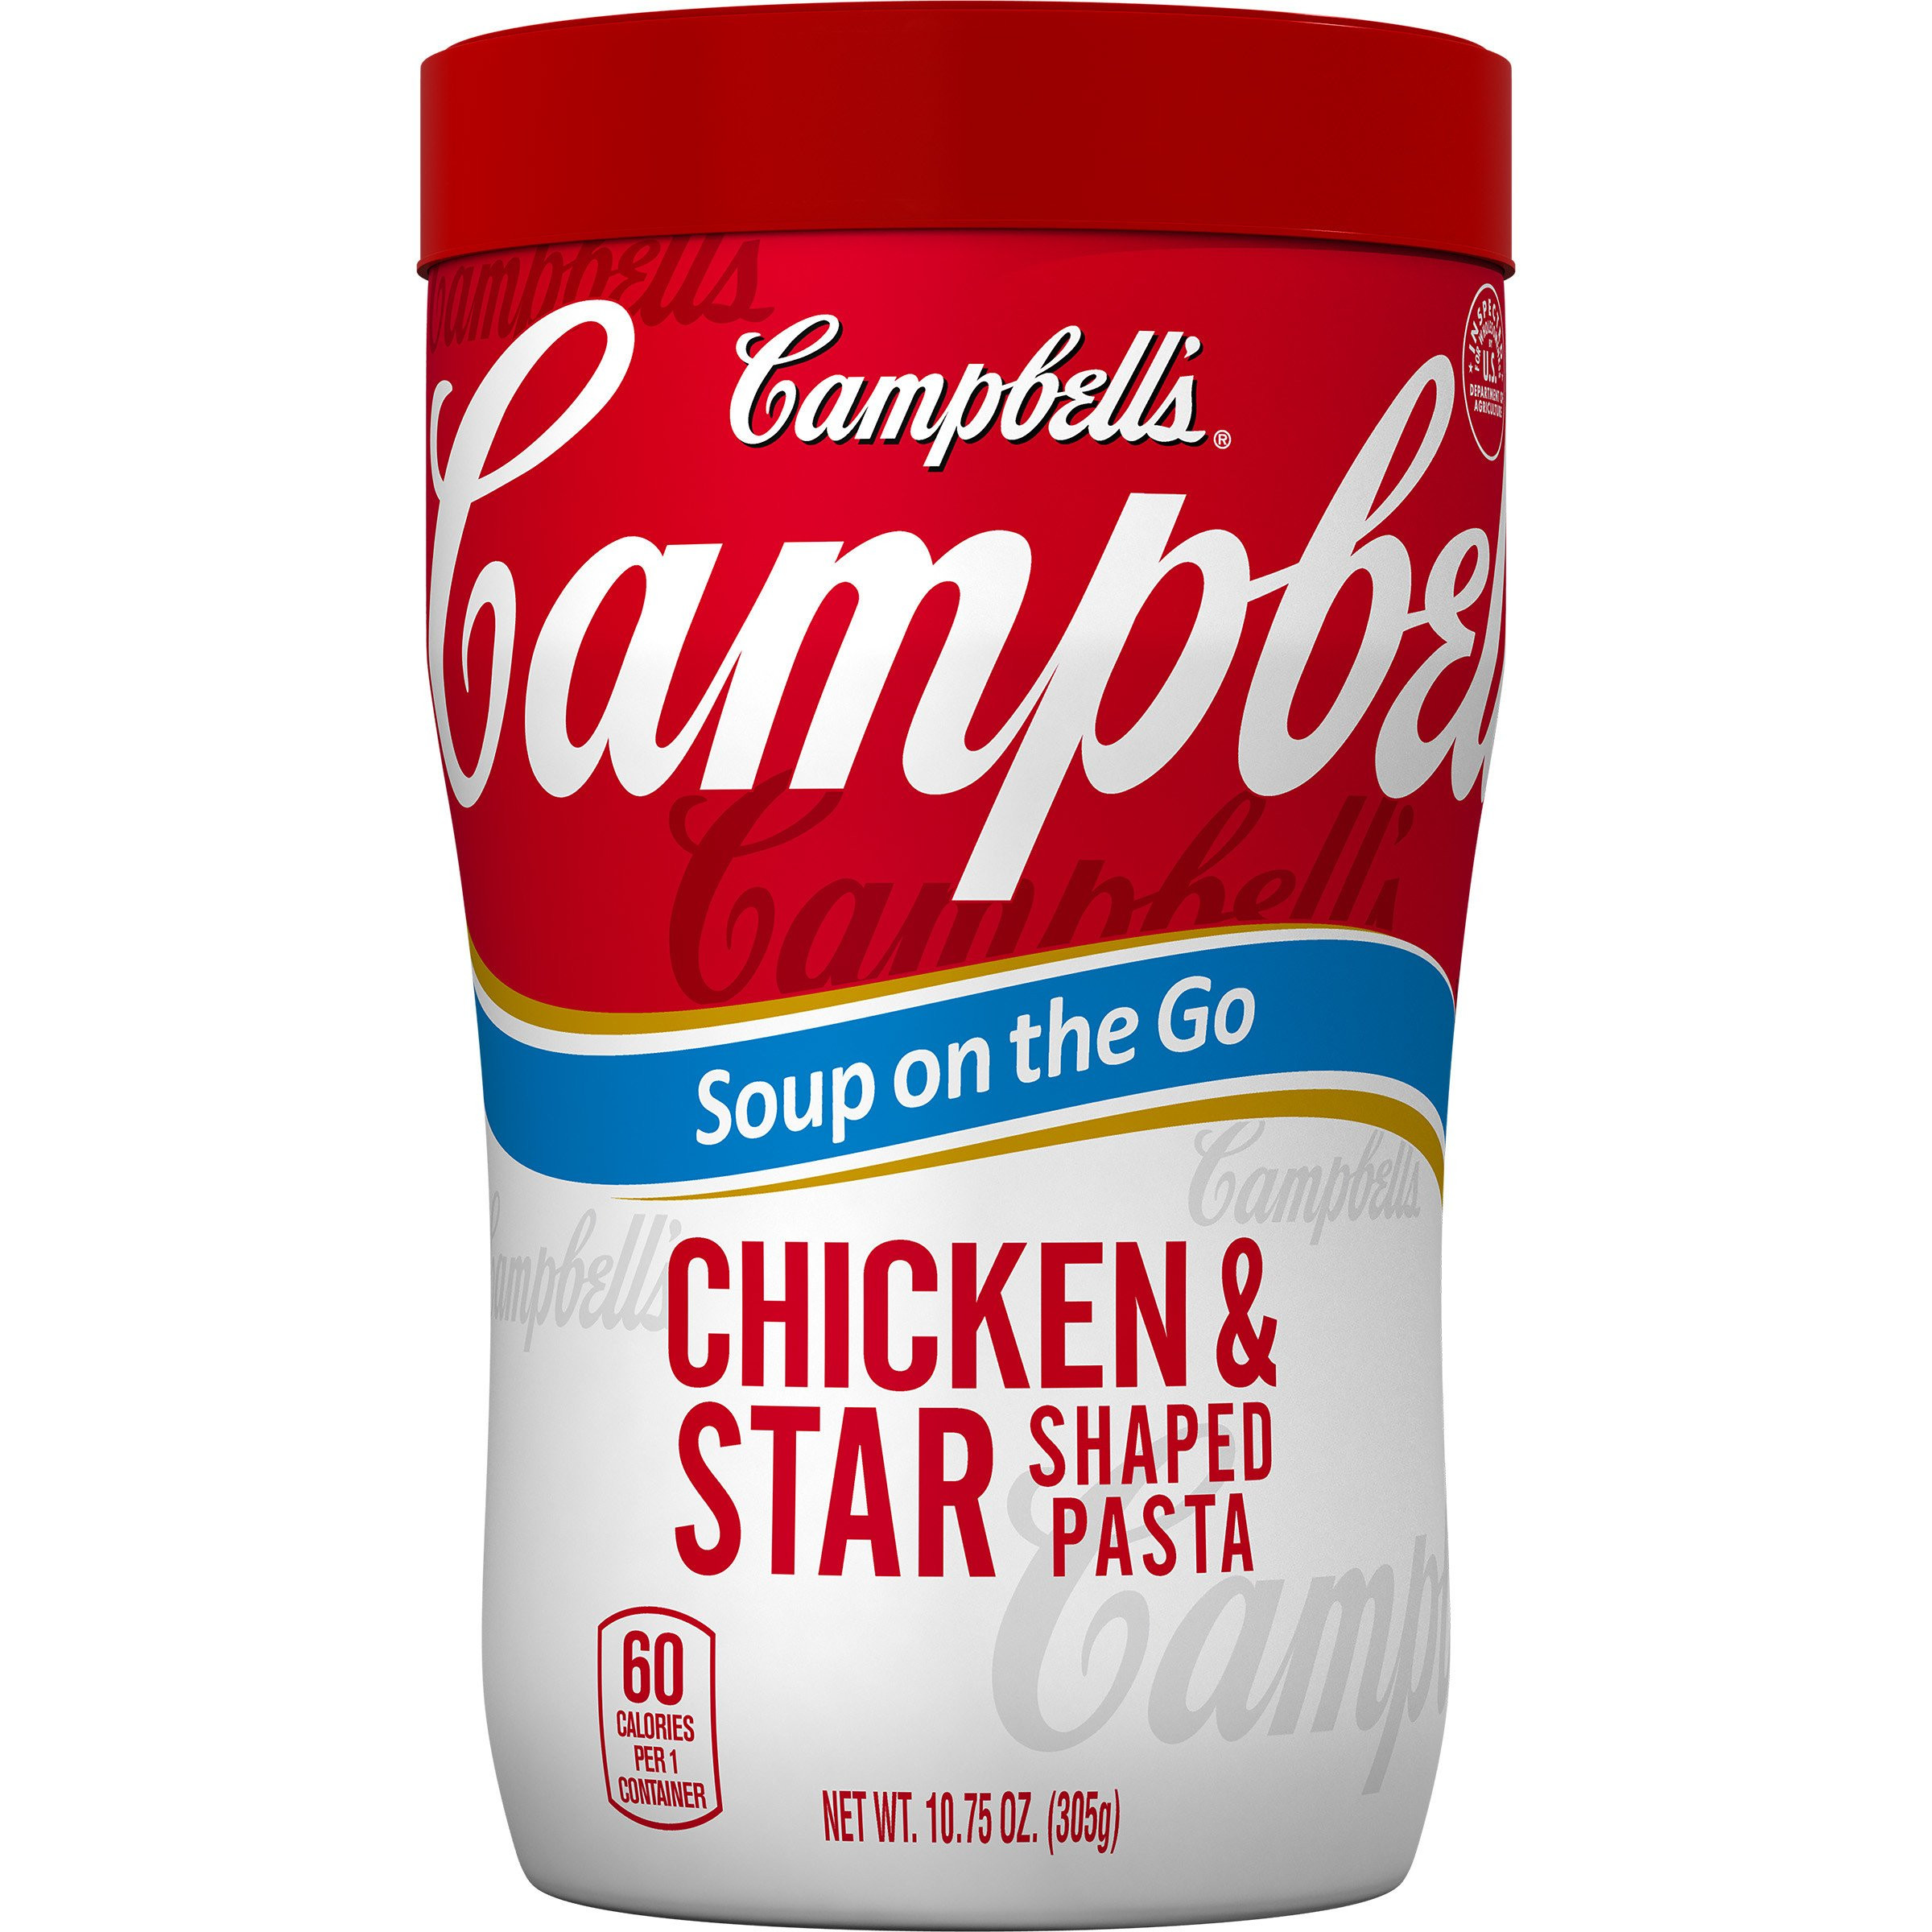 Campbells Chicken Noodle Soup
 Amazon Campbell s Soup on the Go Chicken & Mini